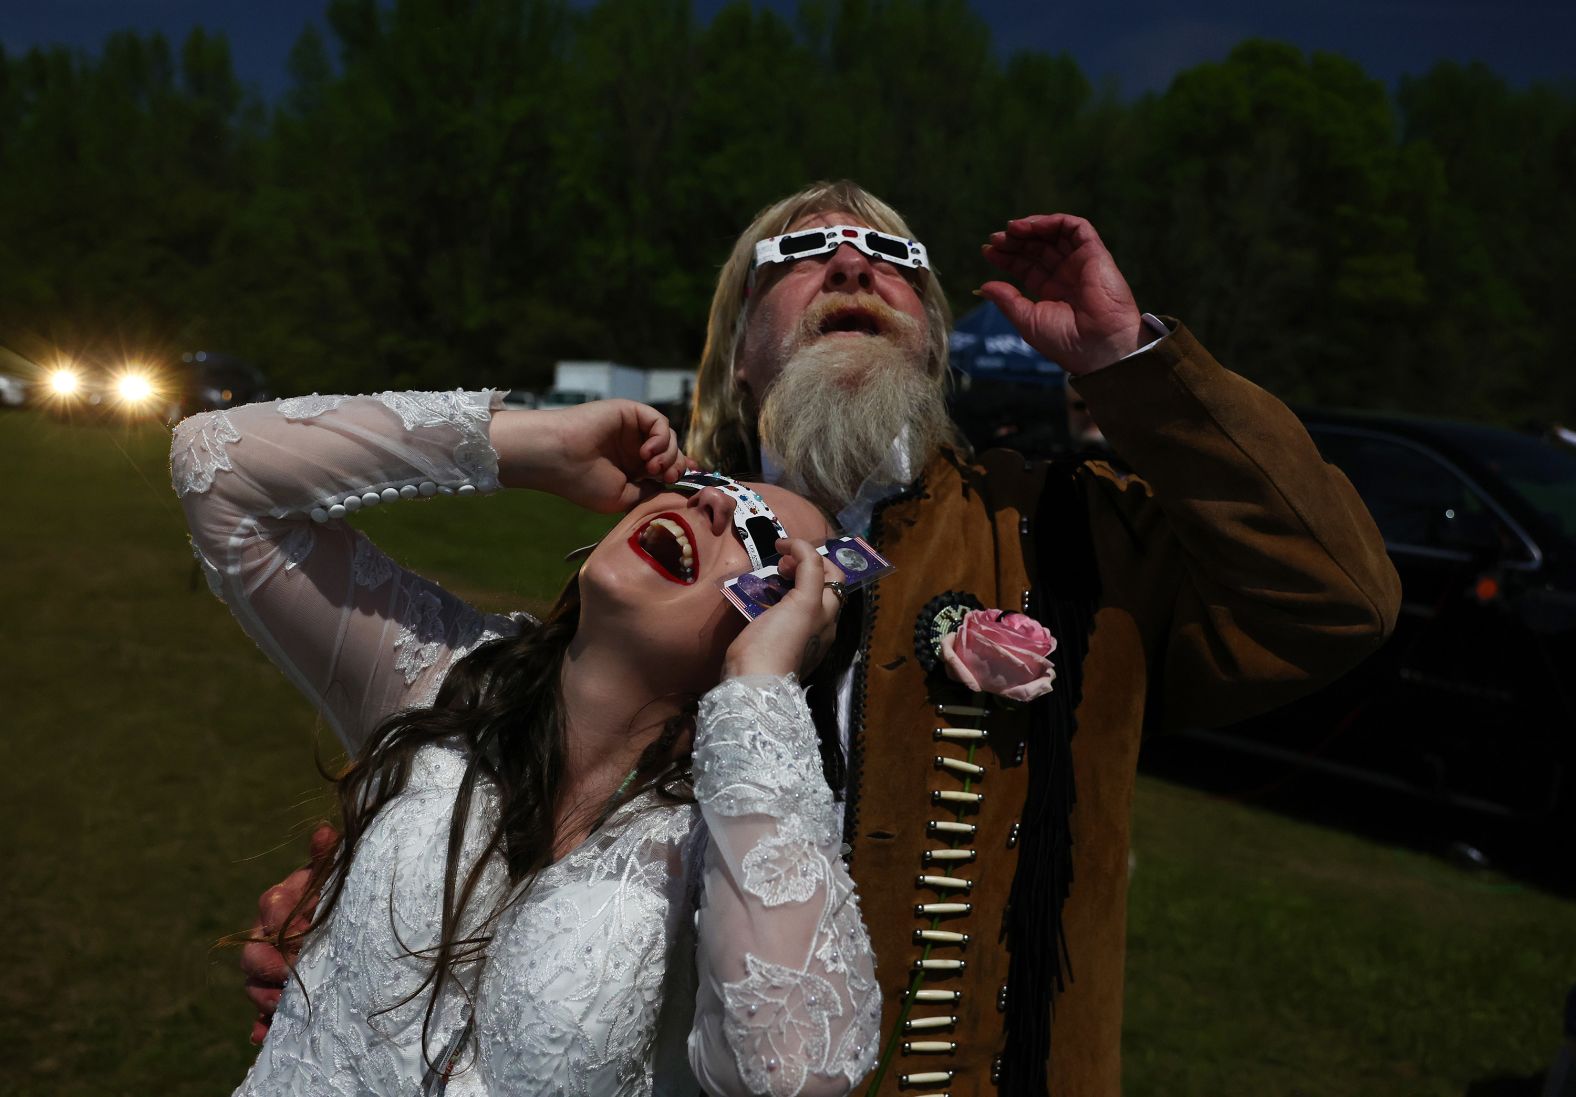 A newly married couple views the eclipse after a <a href="index.php?page=&url=https%3A%2F%2Fwww.cnn.com%2Fworld%2Flive-news%2Ftotal-solar-eclipse-04-08-24-scn%2Fh_c5bf02a1f61852f076e1c082cd6f6290" target="_blank">mass wedding</a> in Russellville, Arkansas. They were one of 358 couples who tied the knot at an "Elope at the Eclipse" event.